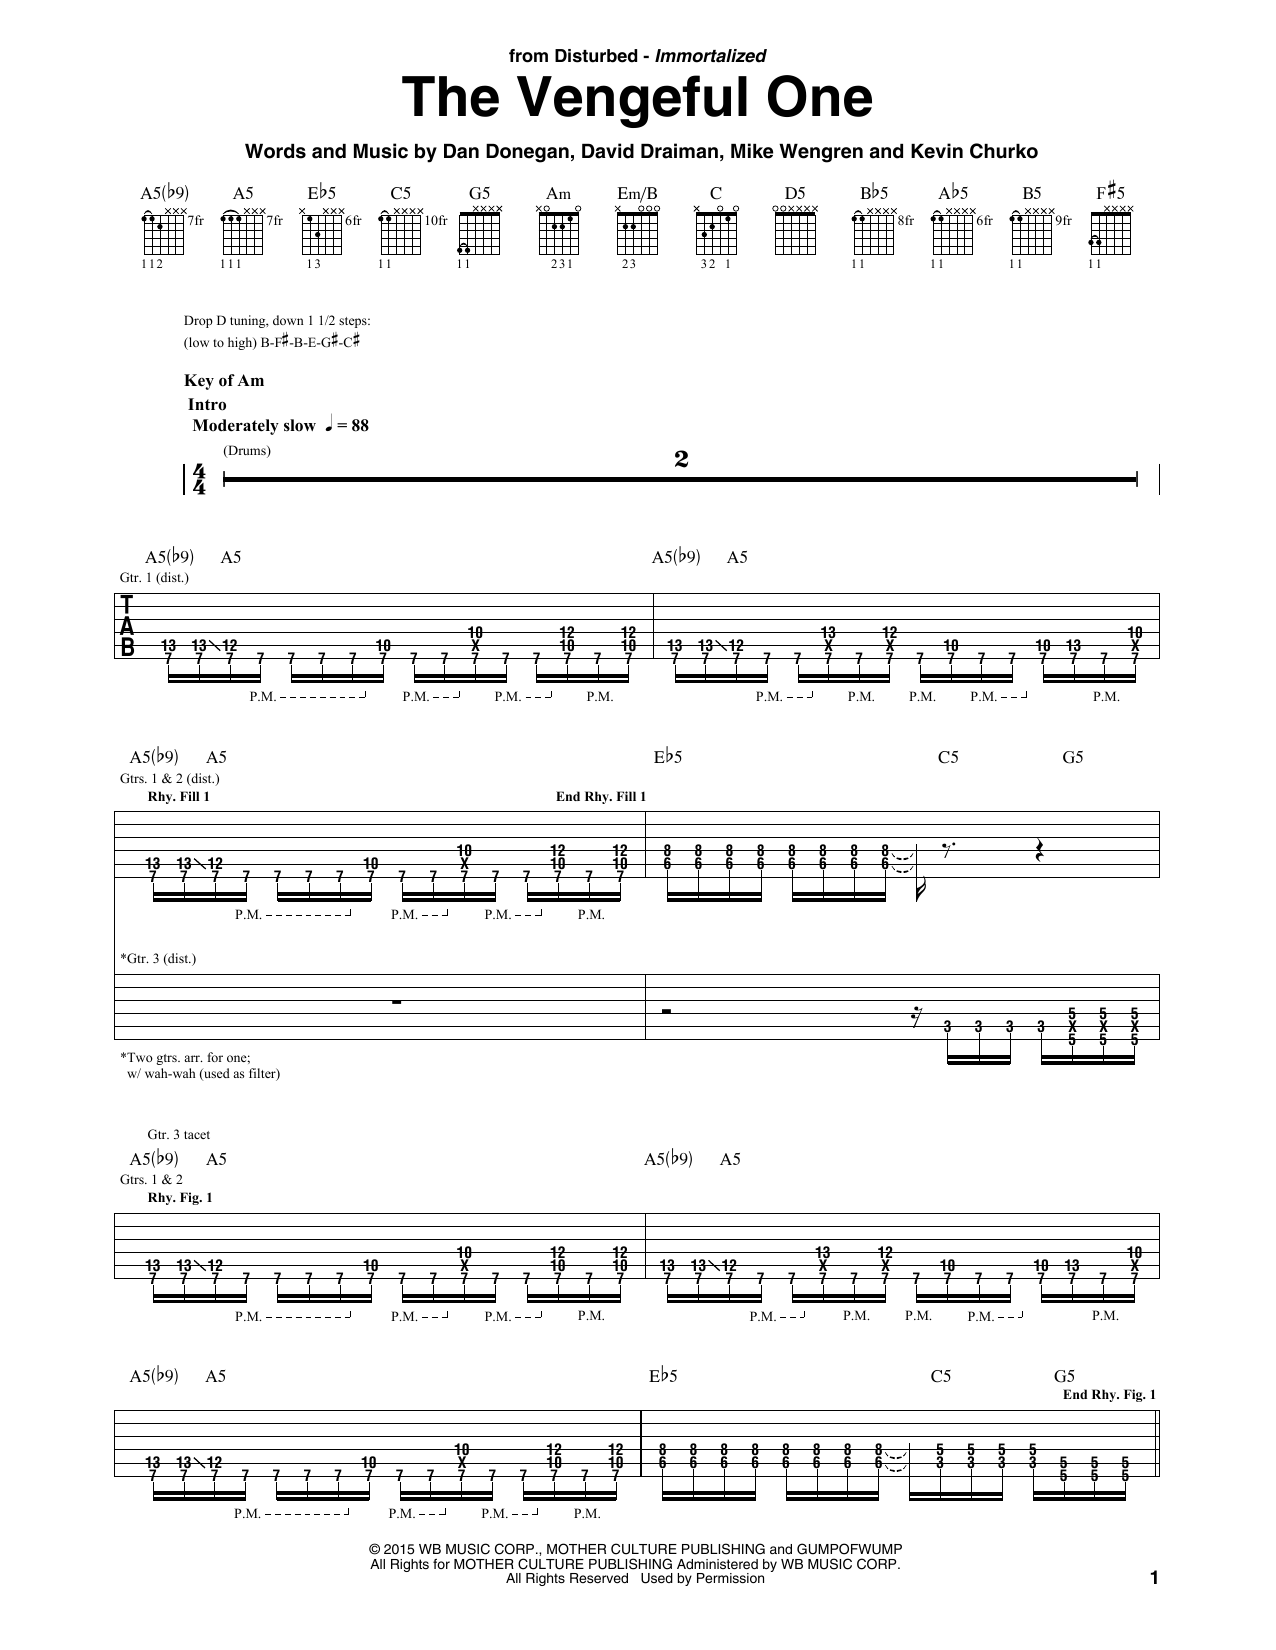 Download Disturbed The Vengeful One Sheet Music